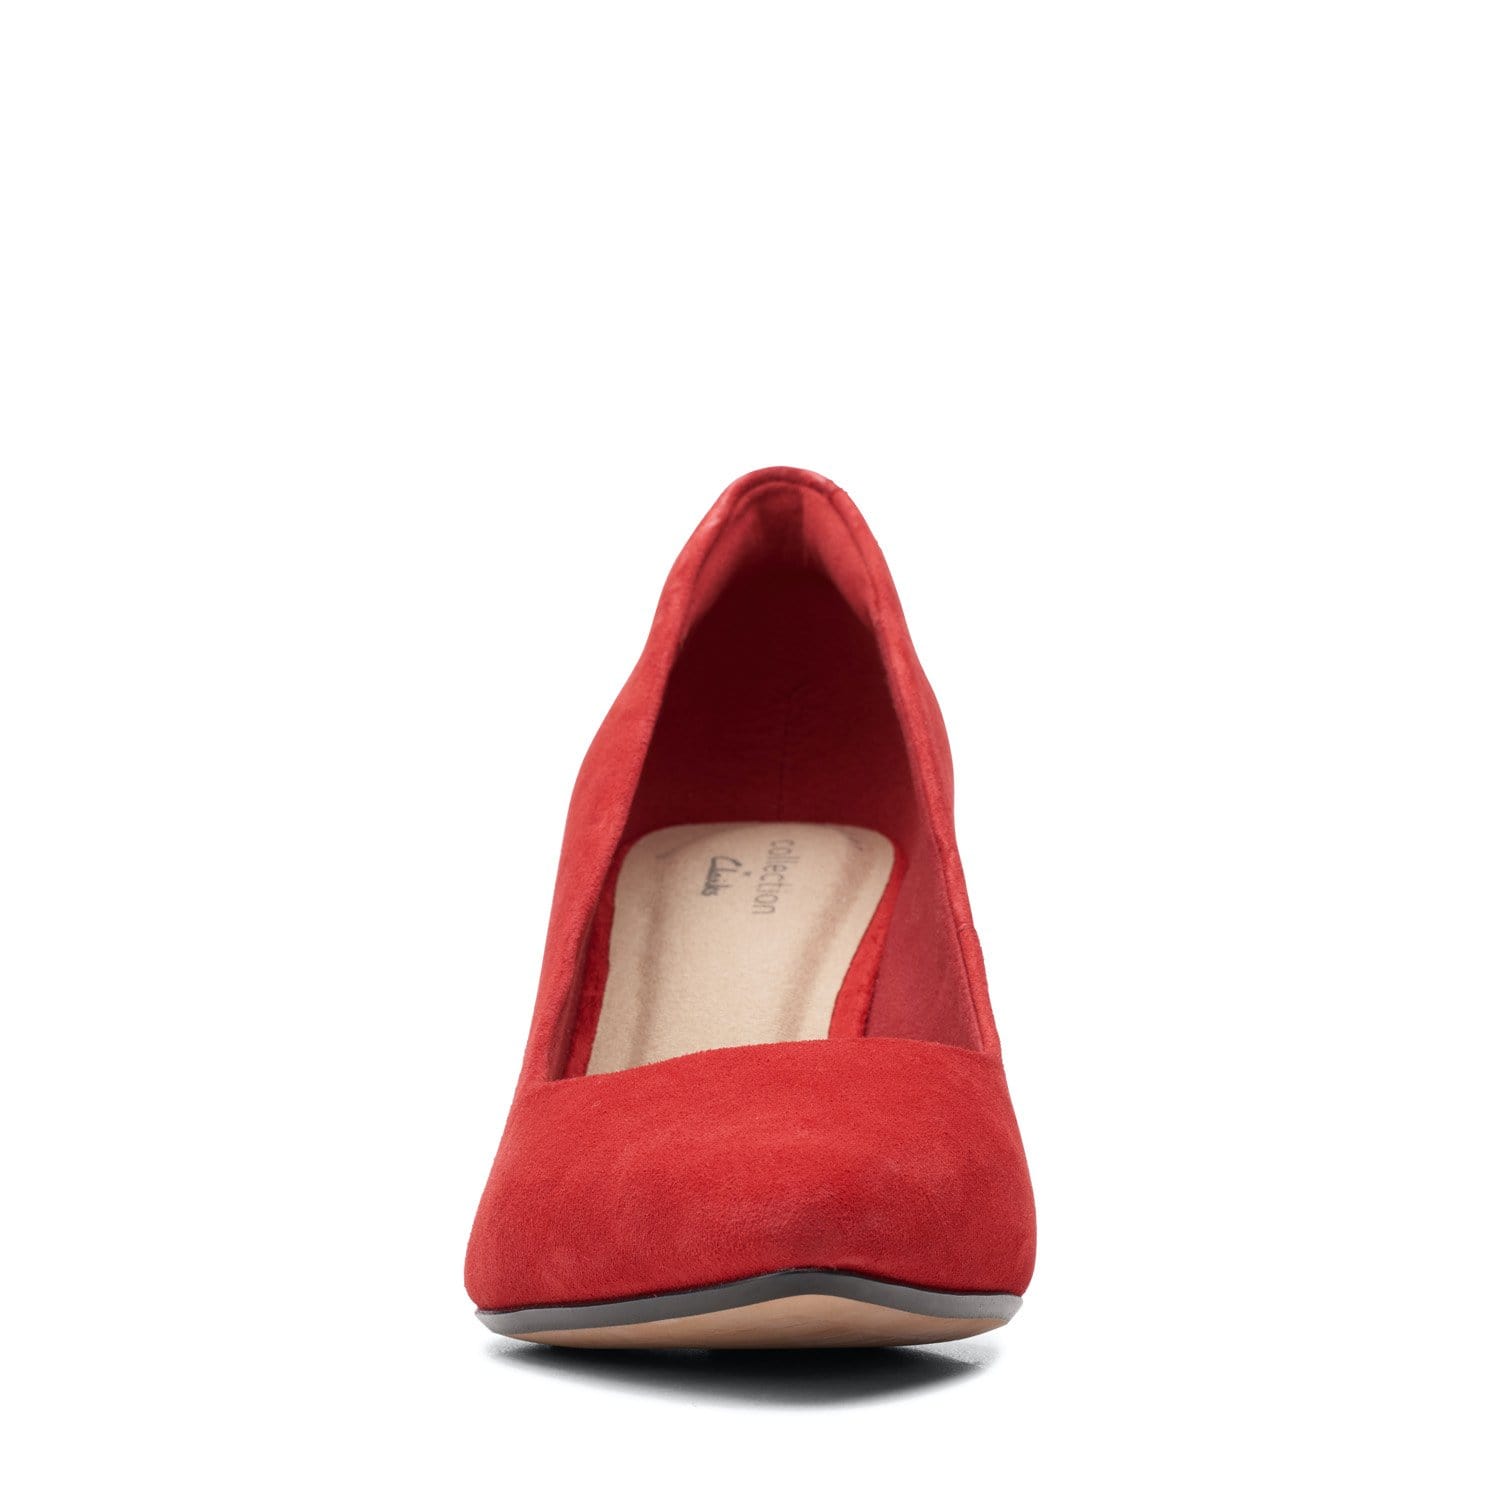 Clarks Illeana Tulip - Shoes - Red Suede - 261543495 - E Width (Wide Fit)